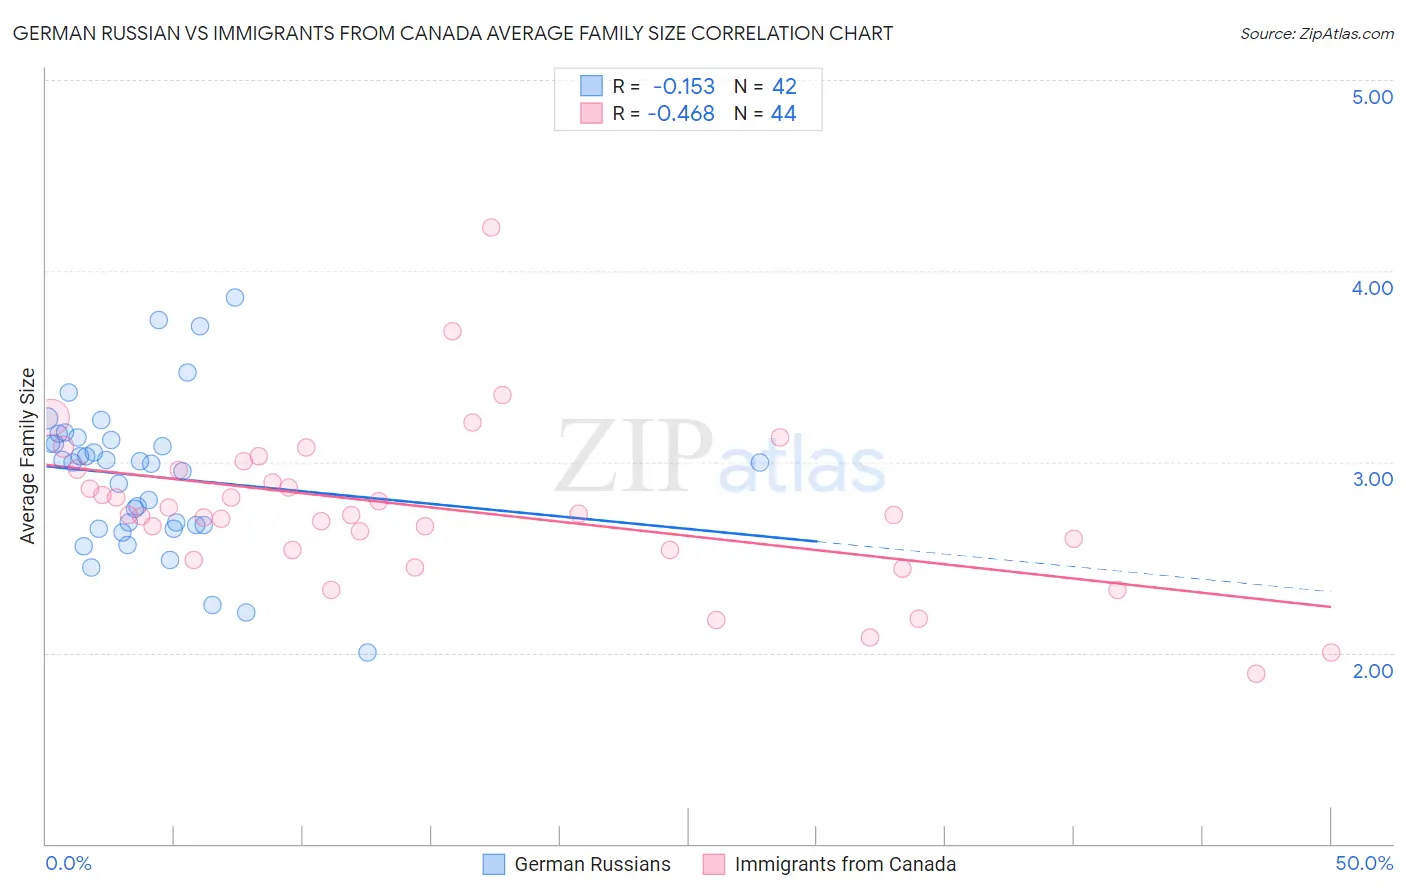 German Russian vs Immigrants from Canada Average Family Size